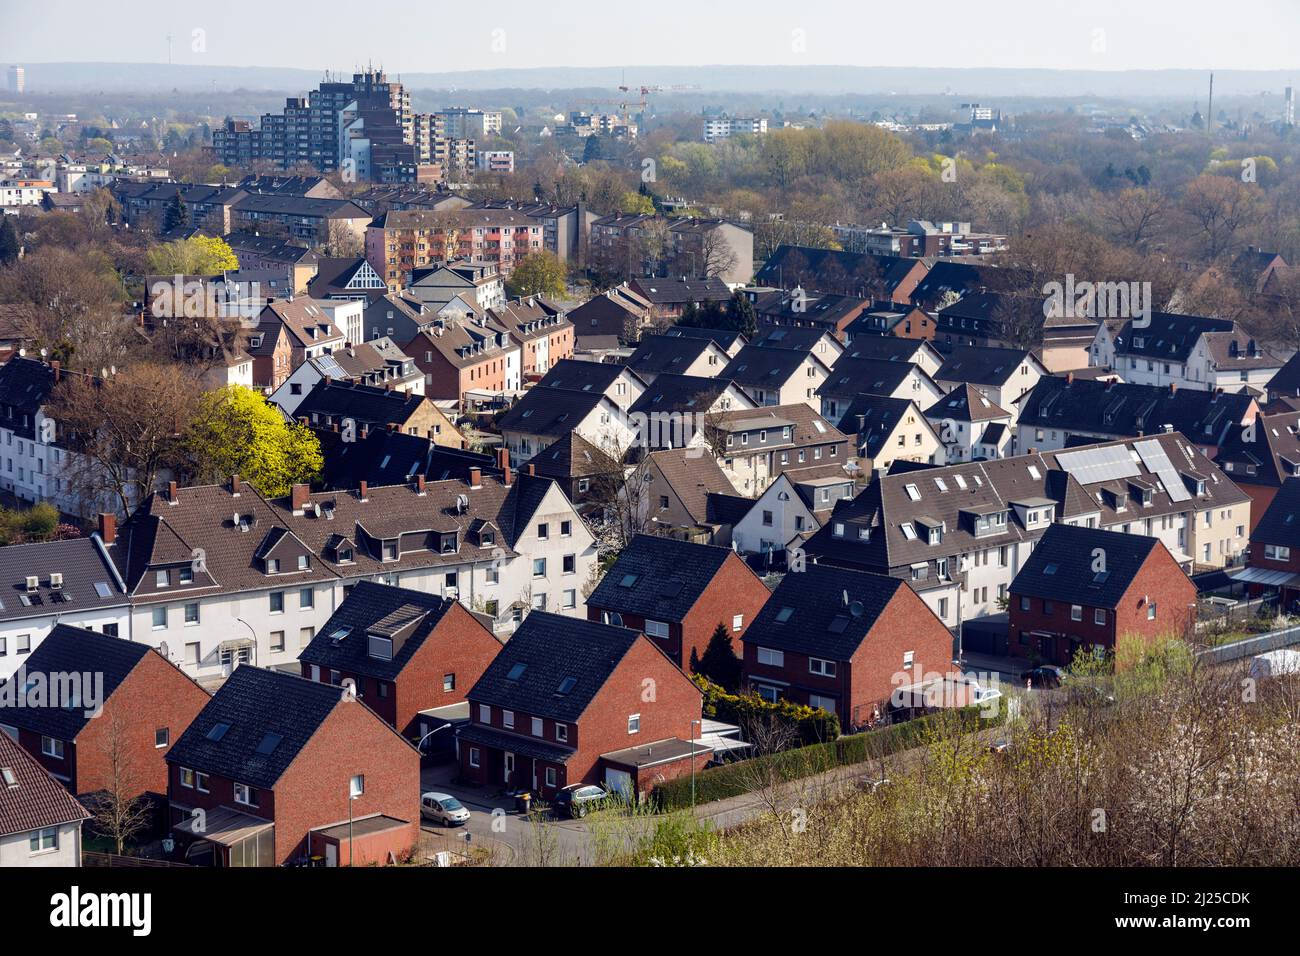 Residential area in the south of Duisburg, Anheim-Angerhausen district Stock Photo